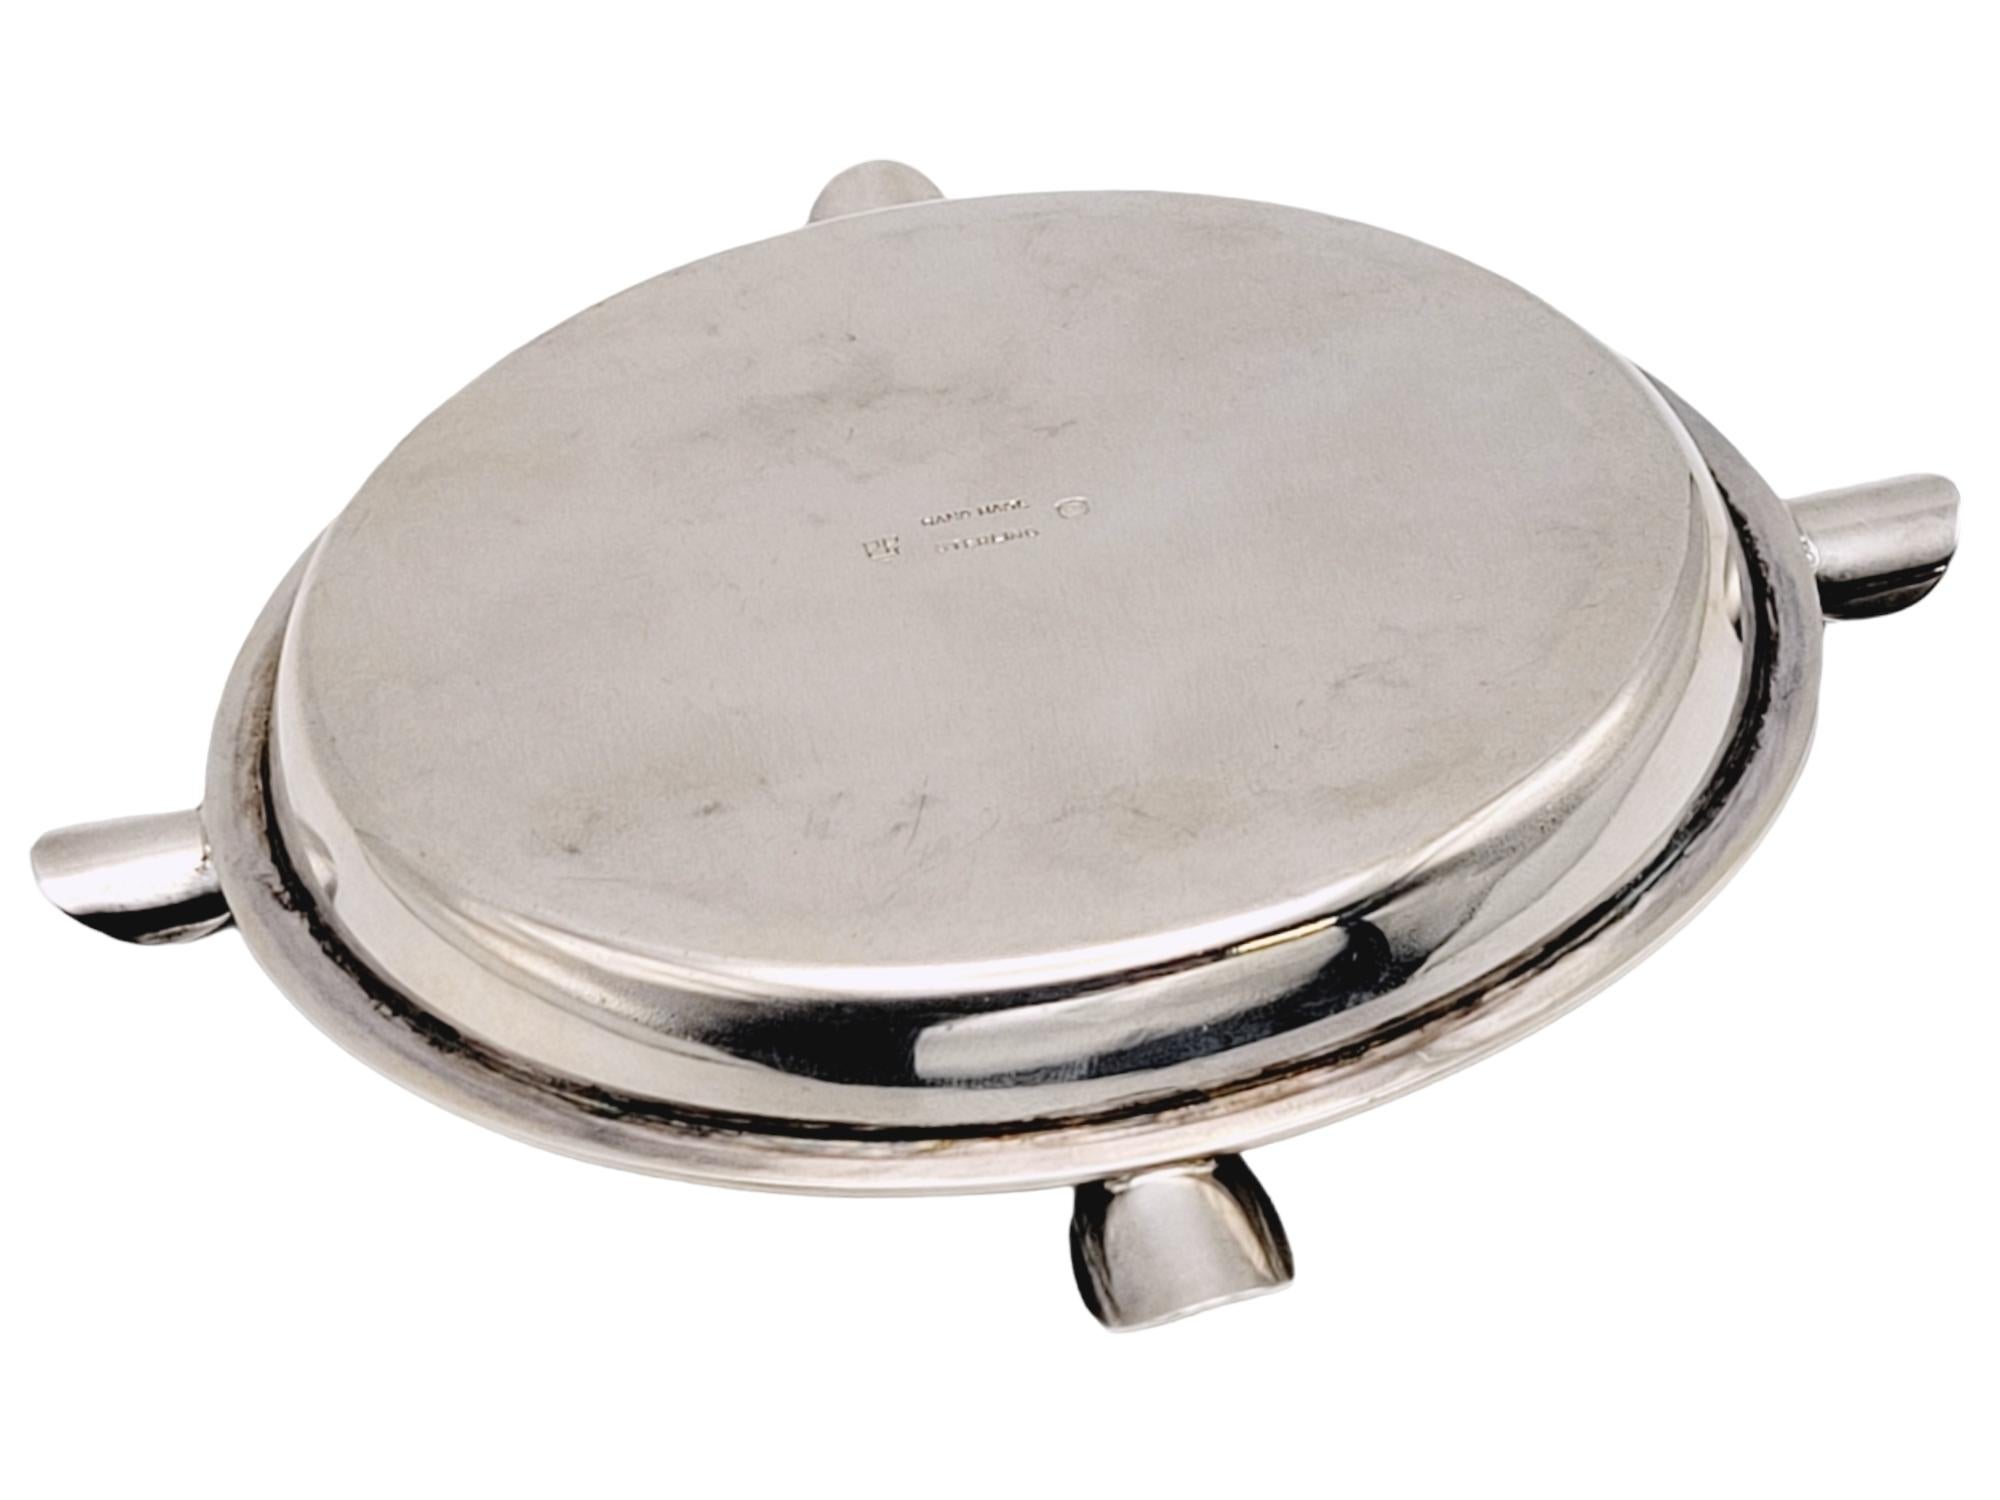 Carl Poul Petersen Polished Modern Ashtray in Sterling Silver, circa 1940-1970 For Sale 1